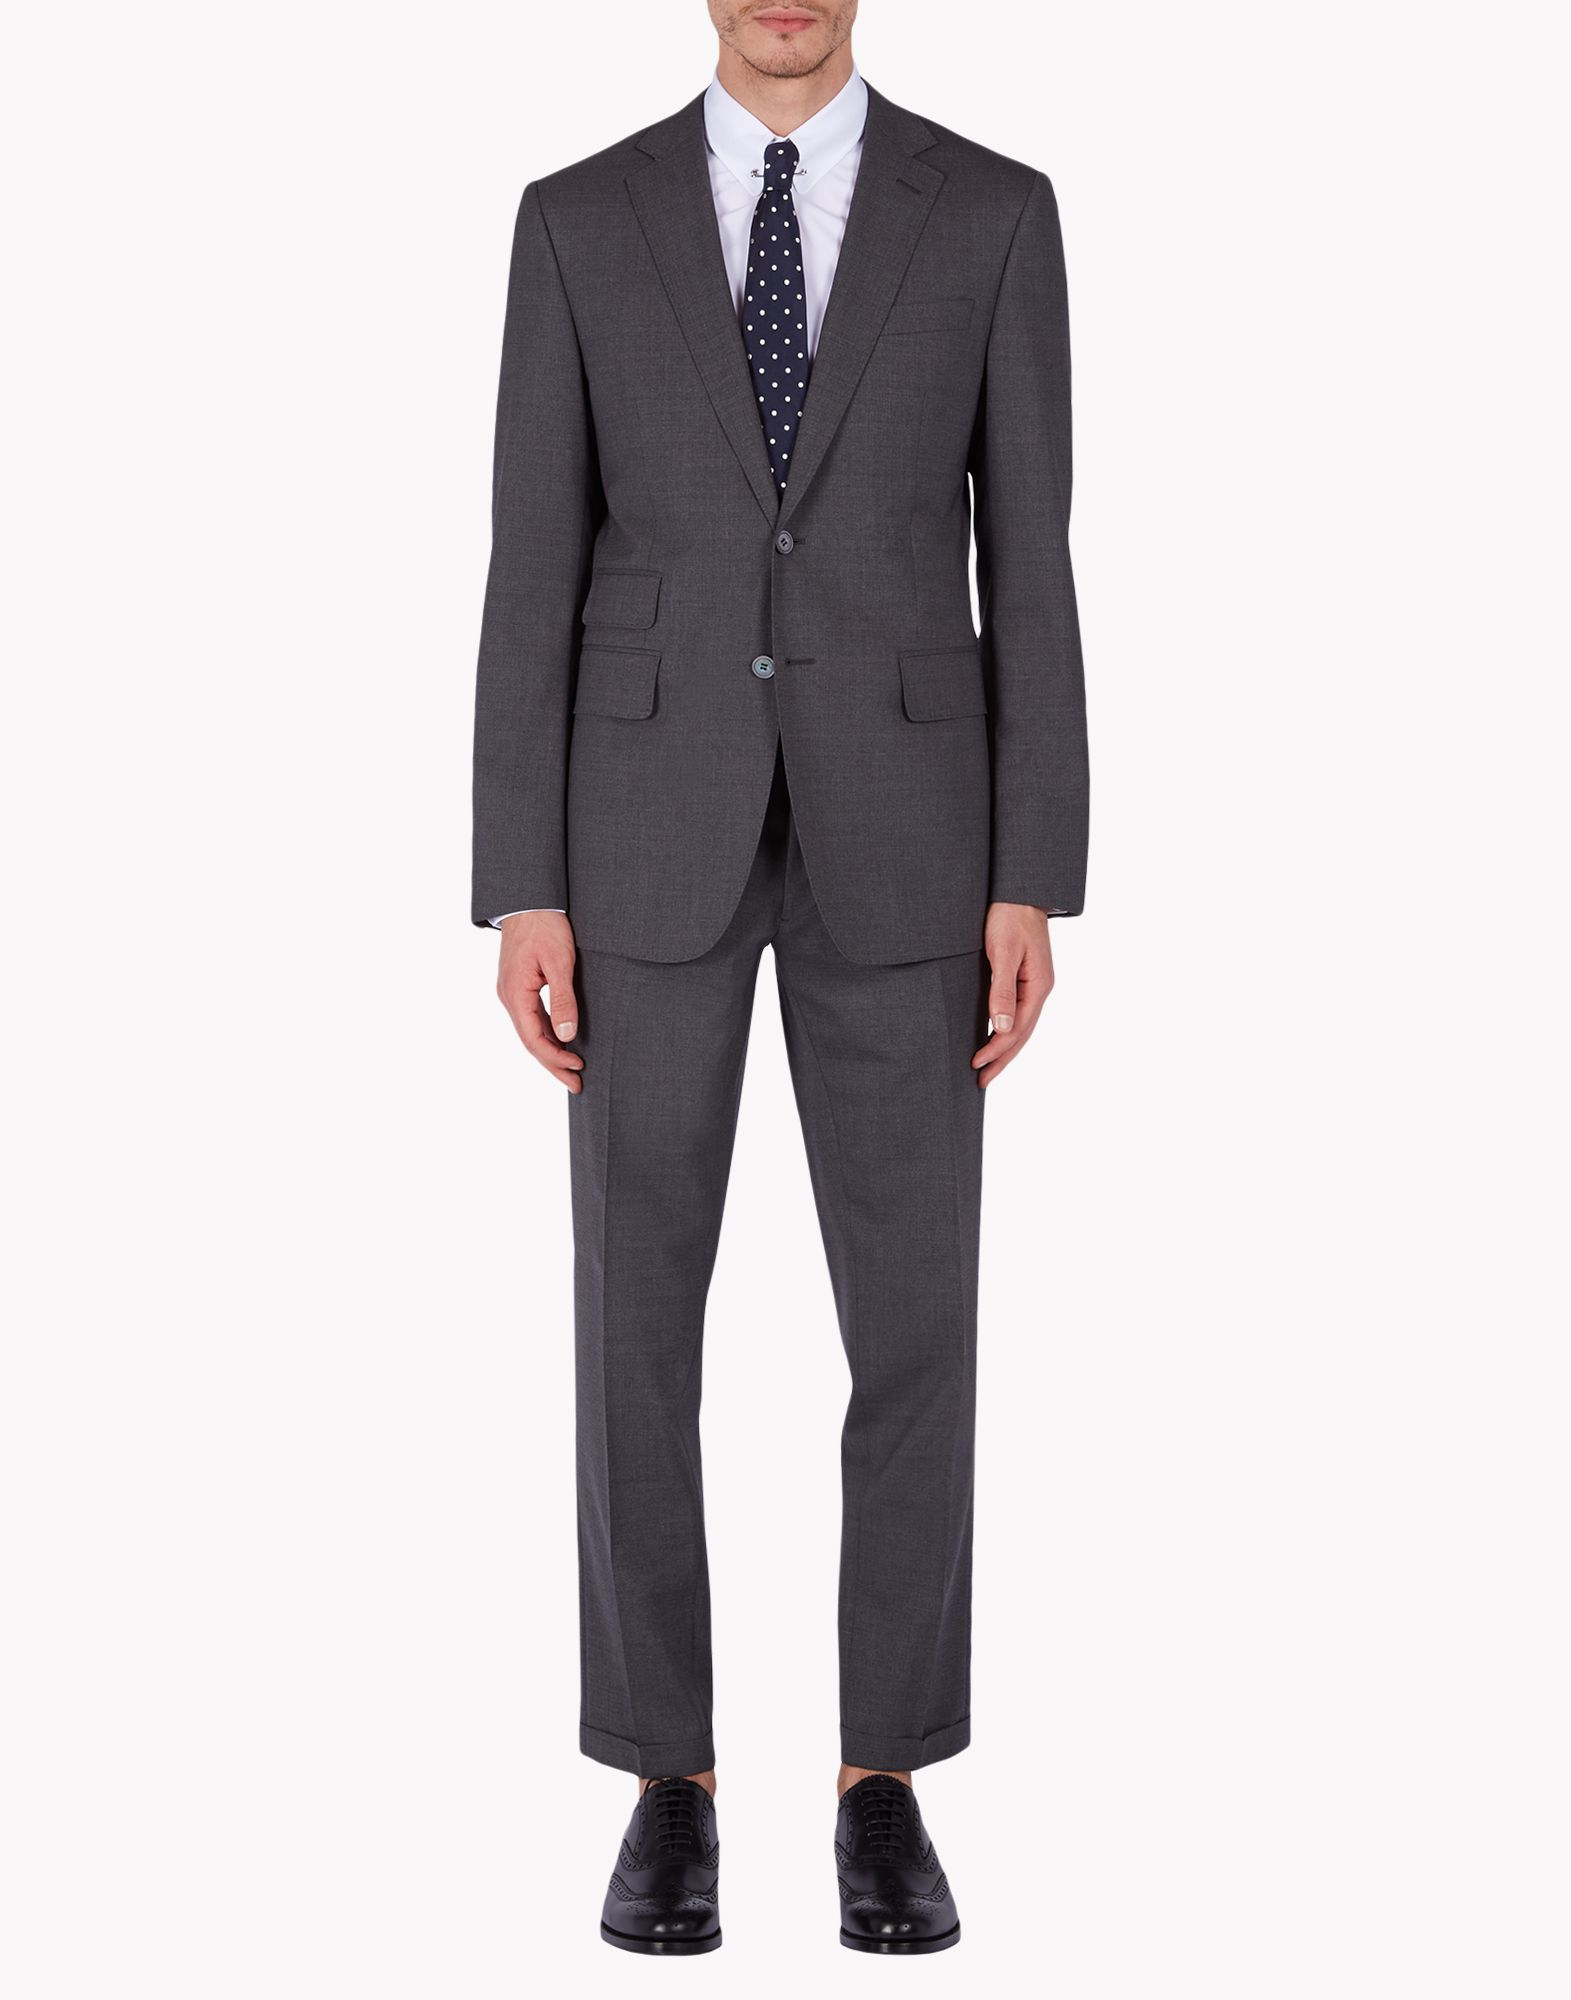 Lyst - Dsquared² Milano Suit in Gray for Men